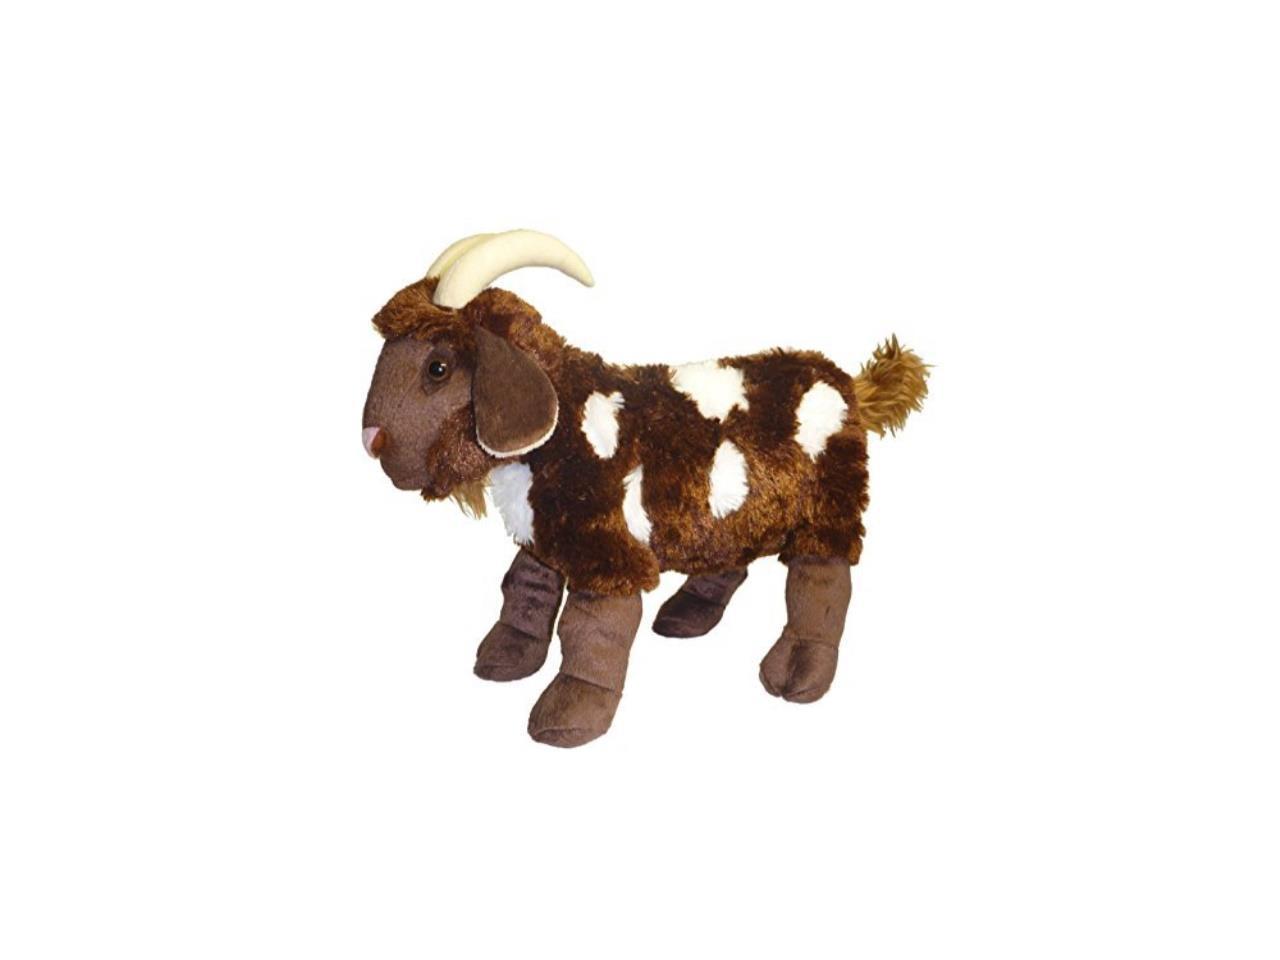 ADORE 15" Standing Mocha the Spotted Goat Plush Stuffed Animal Toy 